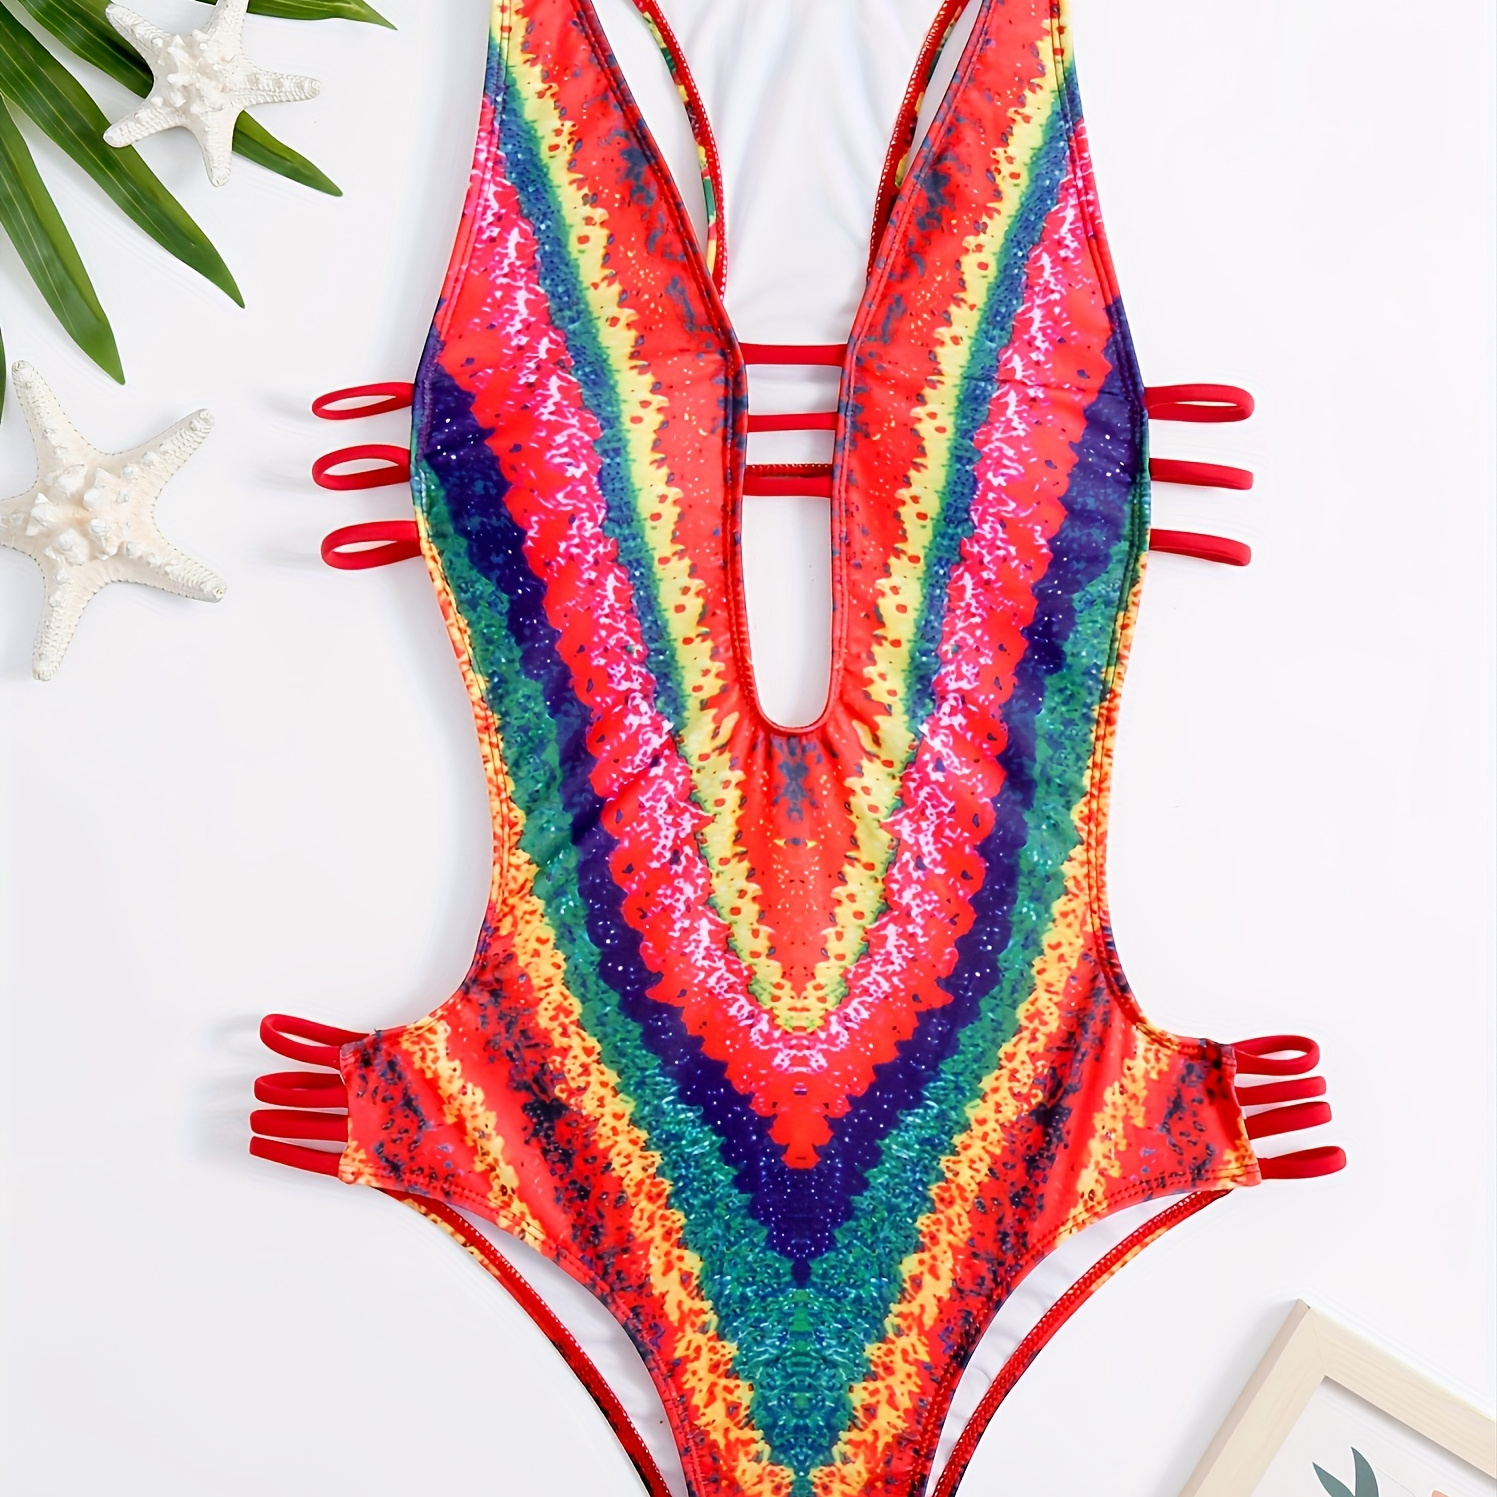 

Colorful Circle Smudge Radiant Color Ladder Straps & Side High Cut Plunge Deep V Open Up Back 1 Piece Swimsuit, Pride Style, Women's Swimwear